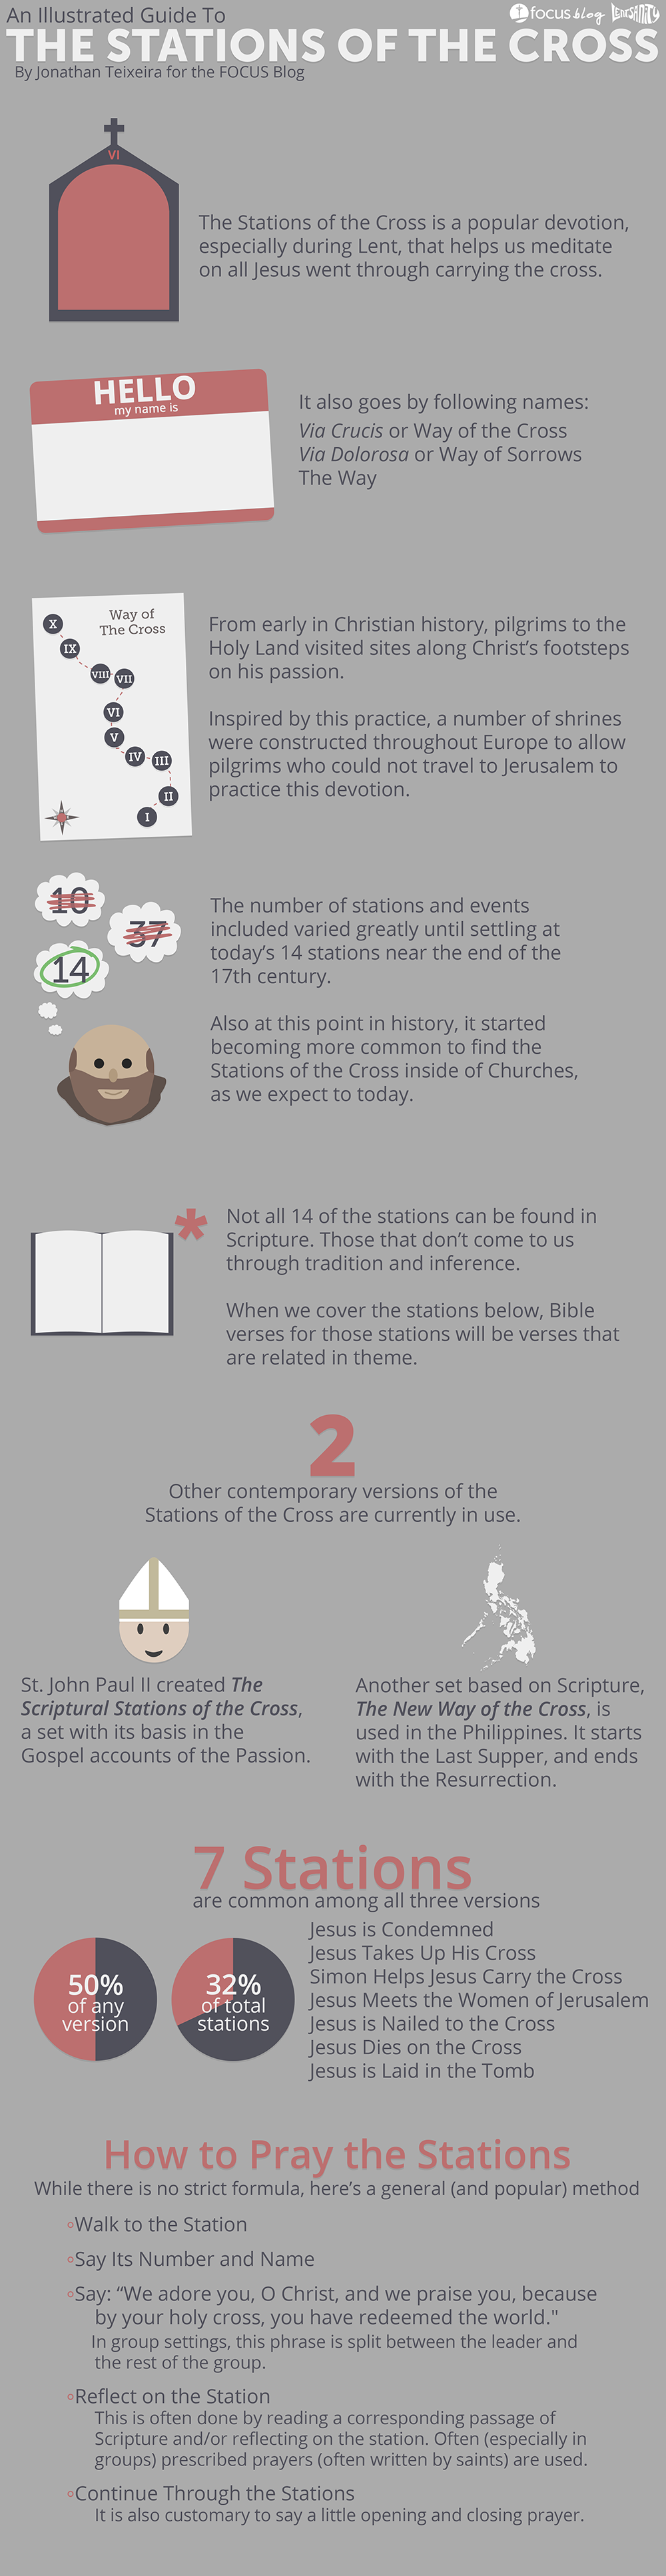 An Illustrated Guide to The Stations of the Cross